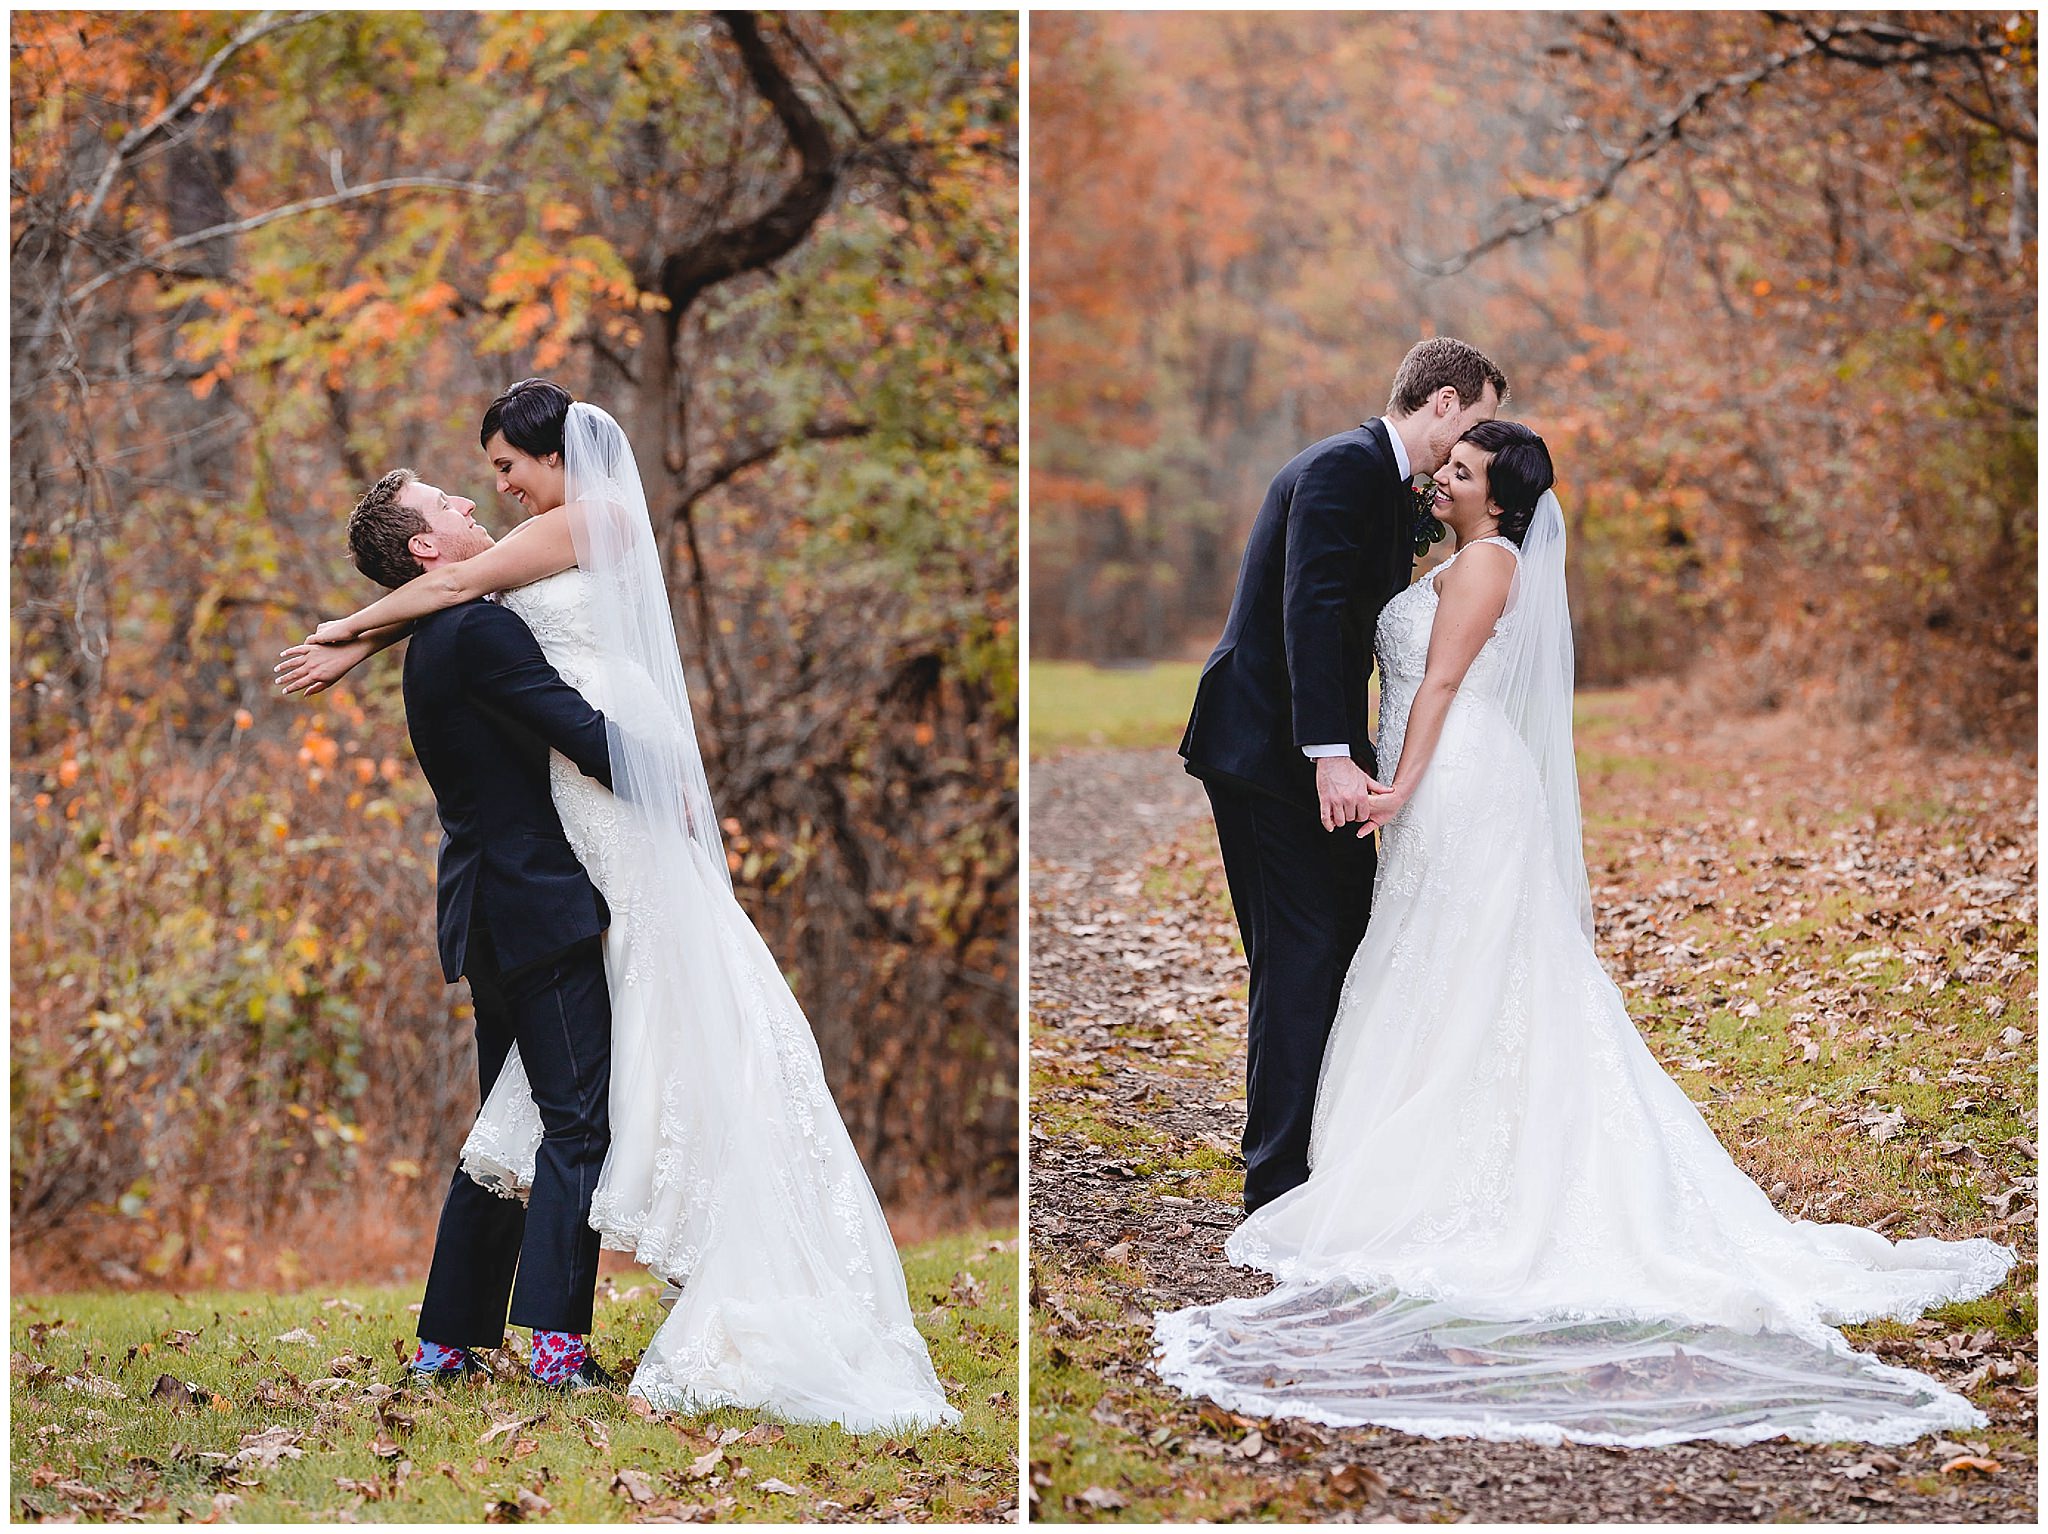 Groom lifts his bride into the air during portraits in the park for their October wedding